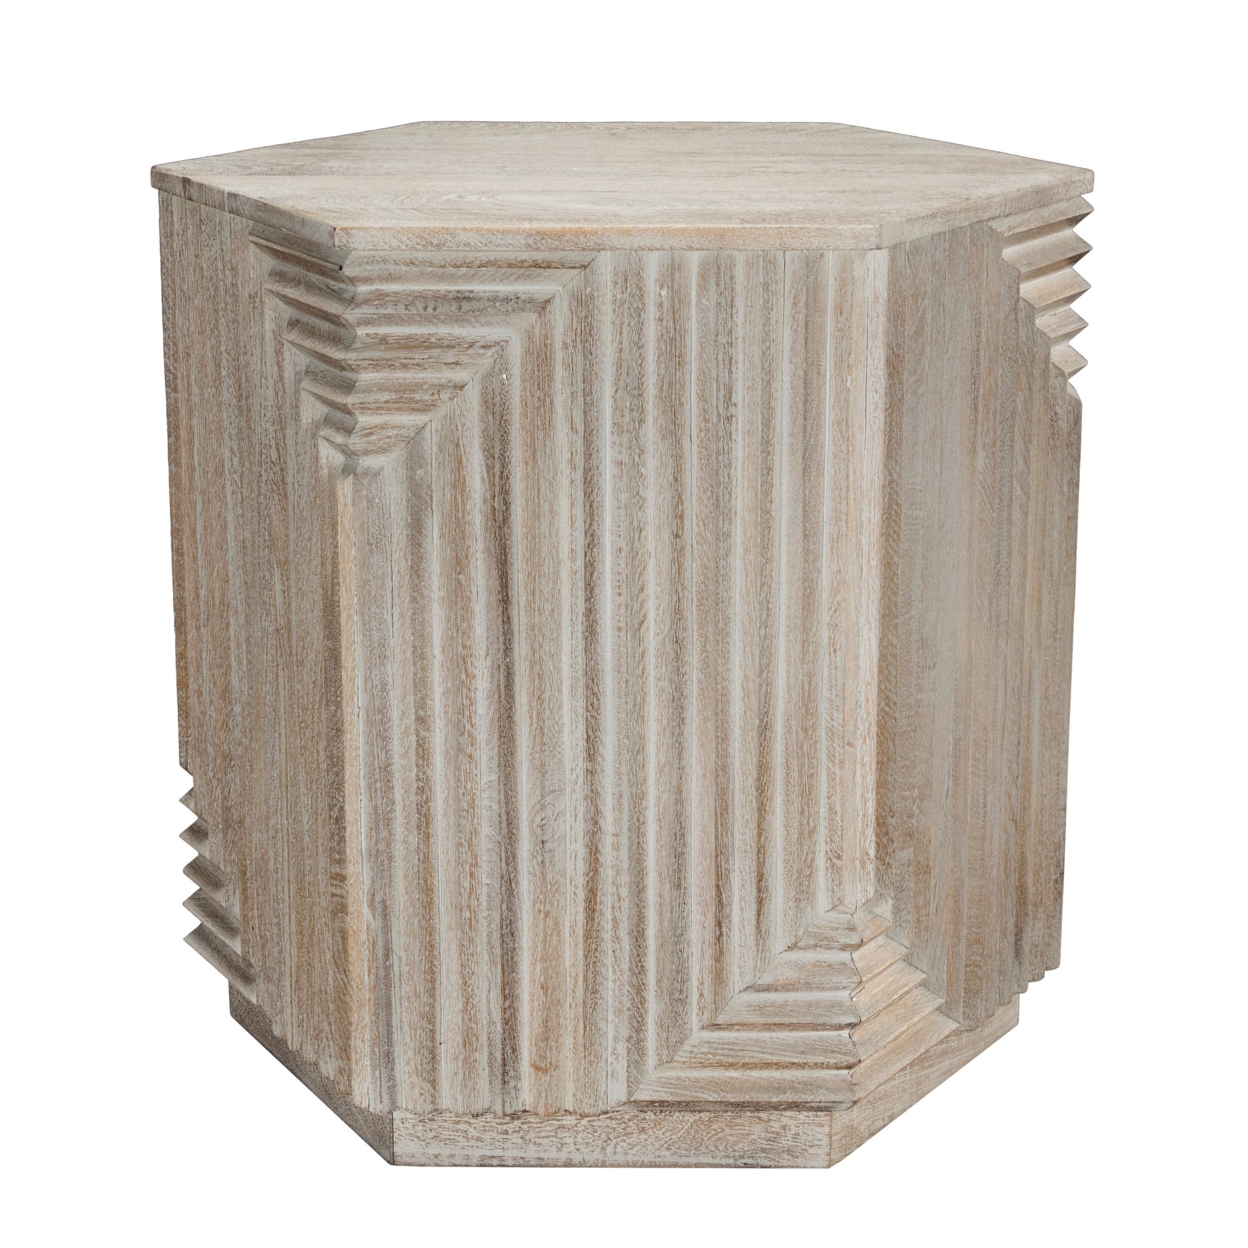 Beck 25 Inch Octagonal Side Table, Classic Embossed Design, Distressed Gray- Saltoro Sherpi